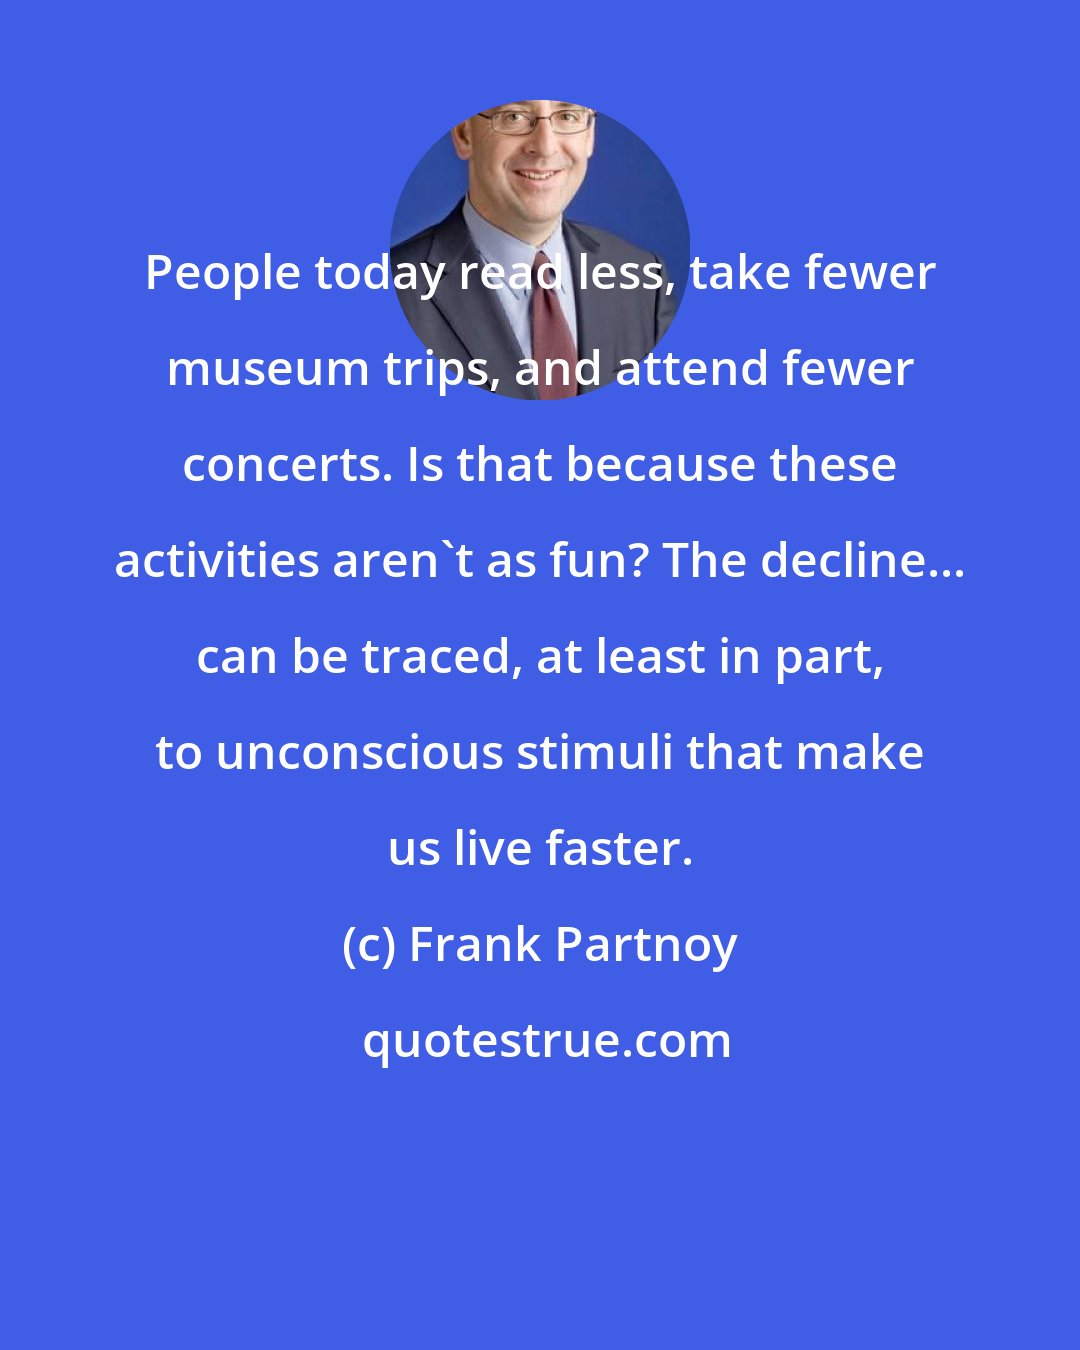 Frank Partnoy: People today read less, take fewer museum trips, and attend fewer concerts. Is that because these activities aren't as fun? The decline... can be traced, at least in part, to unconscious stimuli that make us live faster.